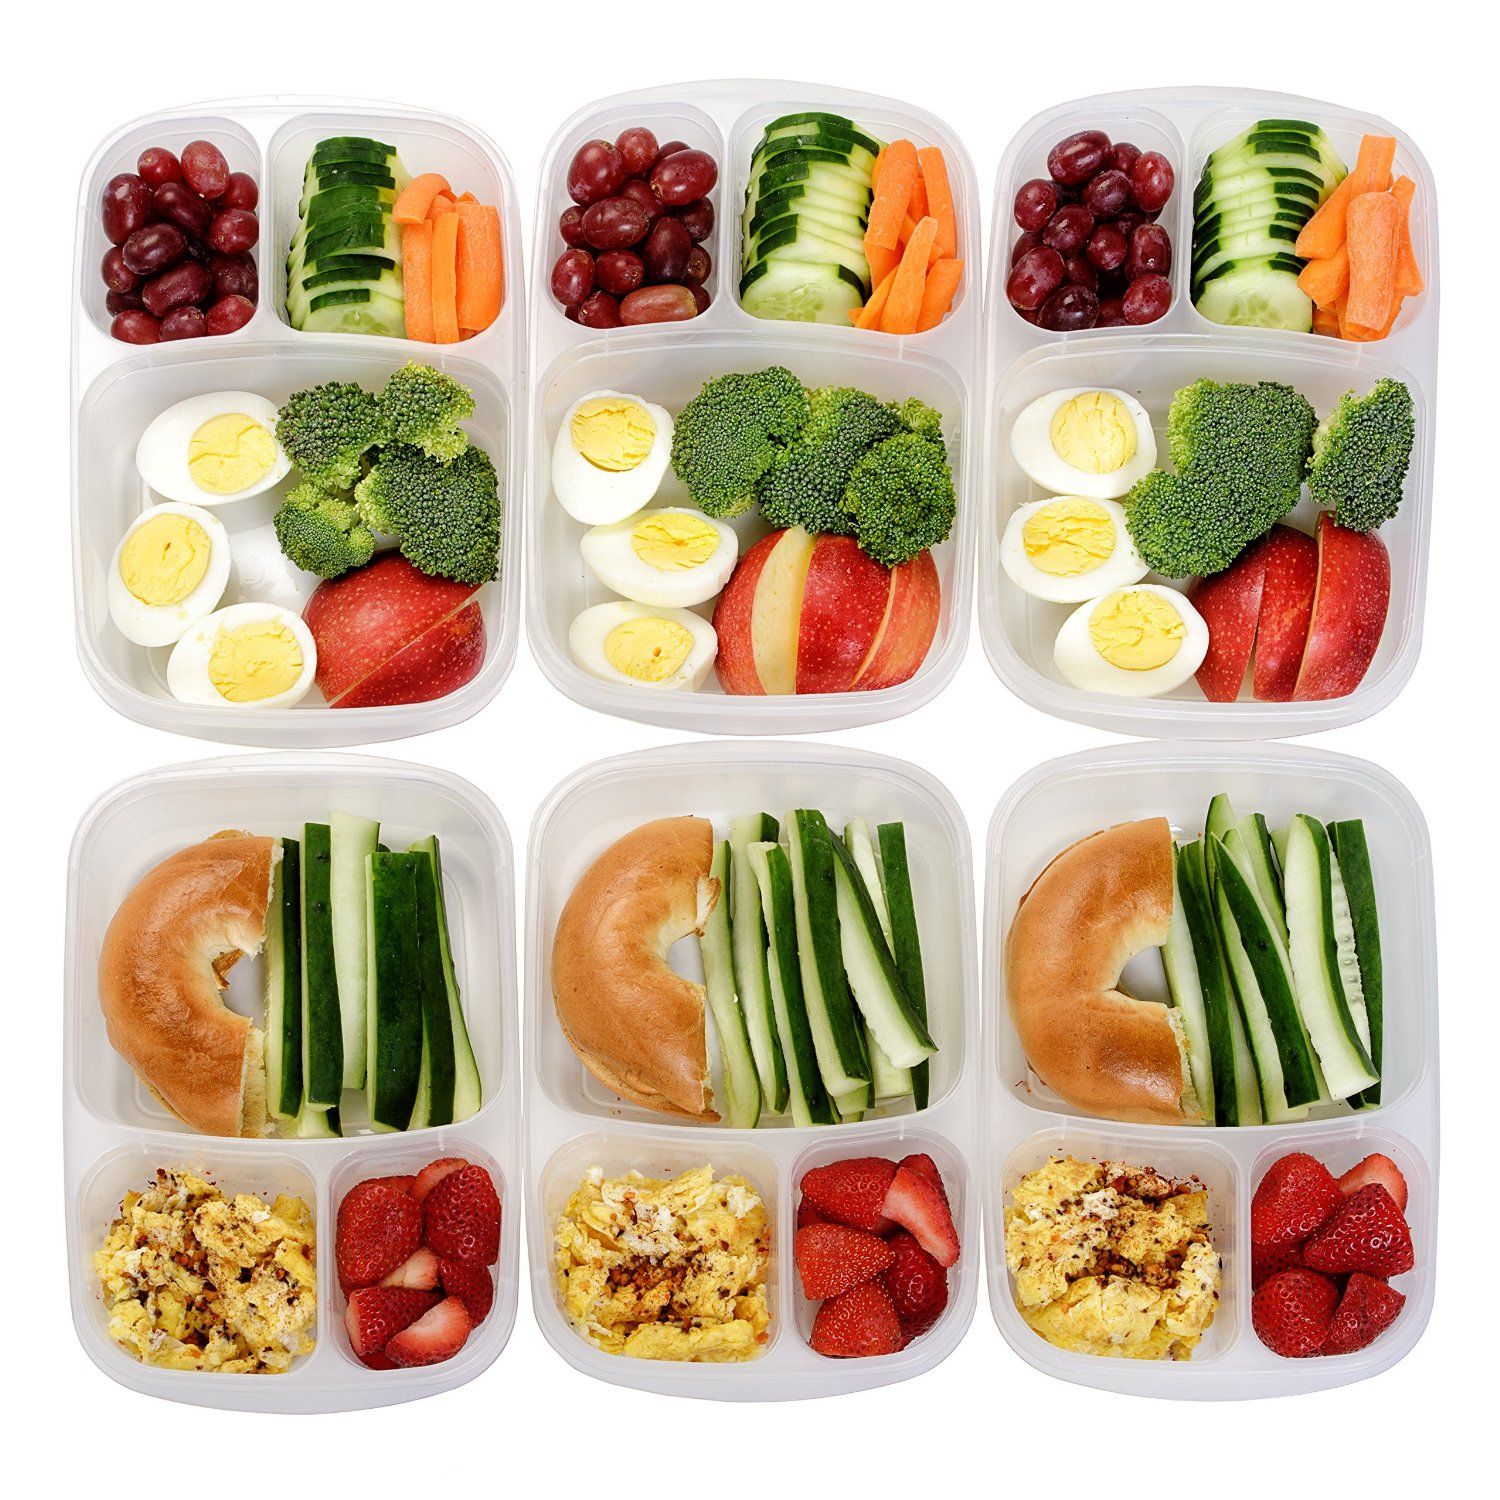 13 Make Ahead Meals for Healthy Eating on the Go | Meals, Snacks and ...